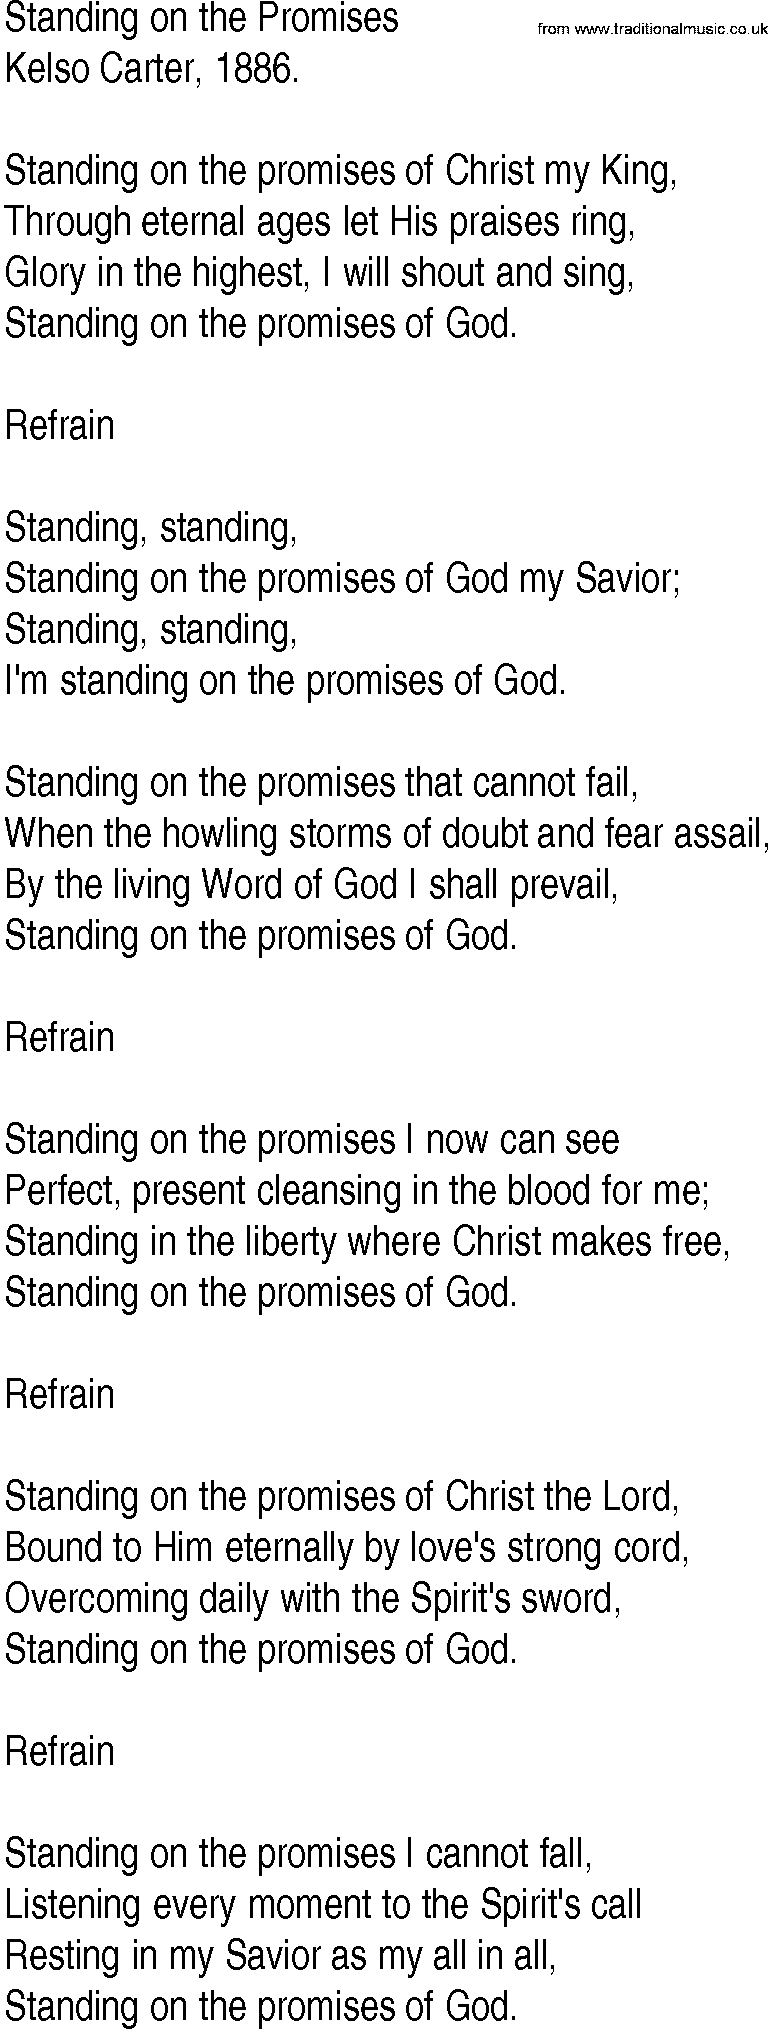 Hymn and Gospel Song: Standing on the Promises by Kelso Carter lyrics